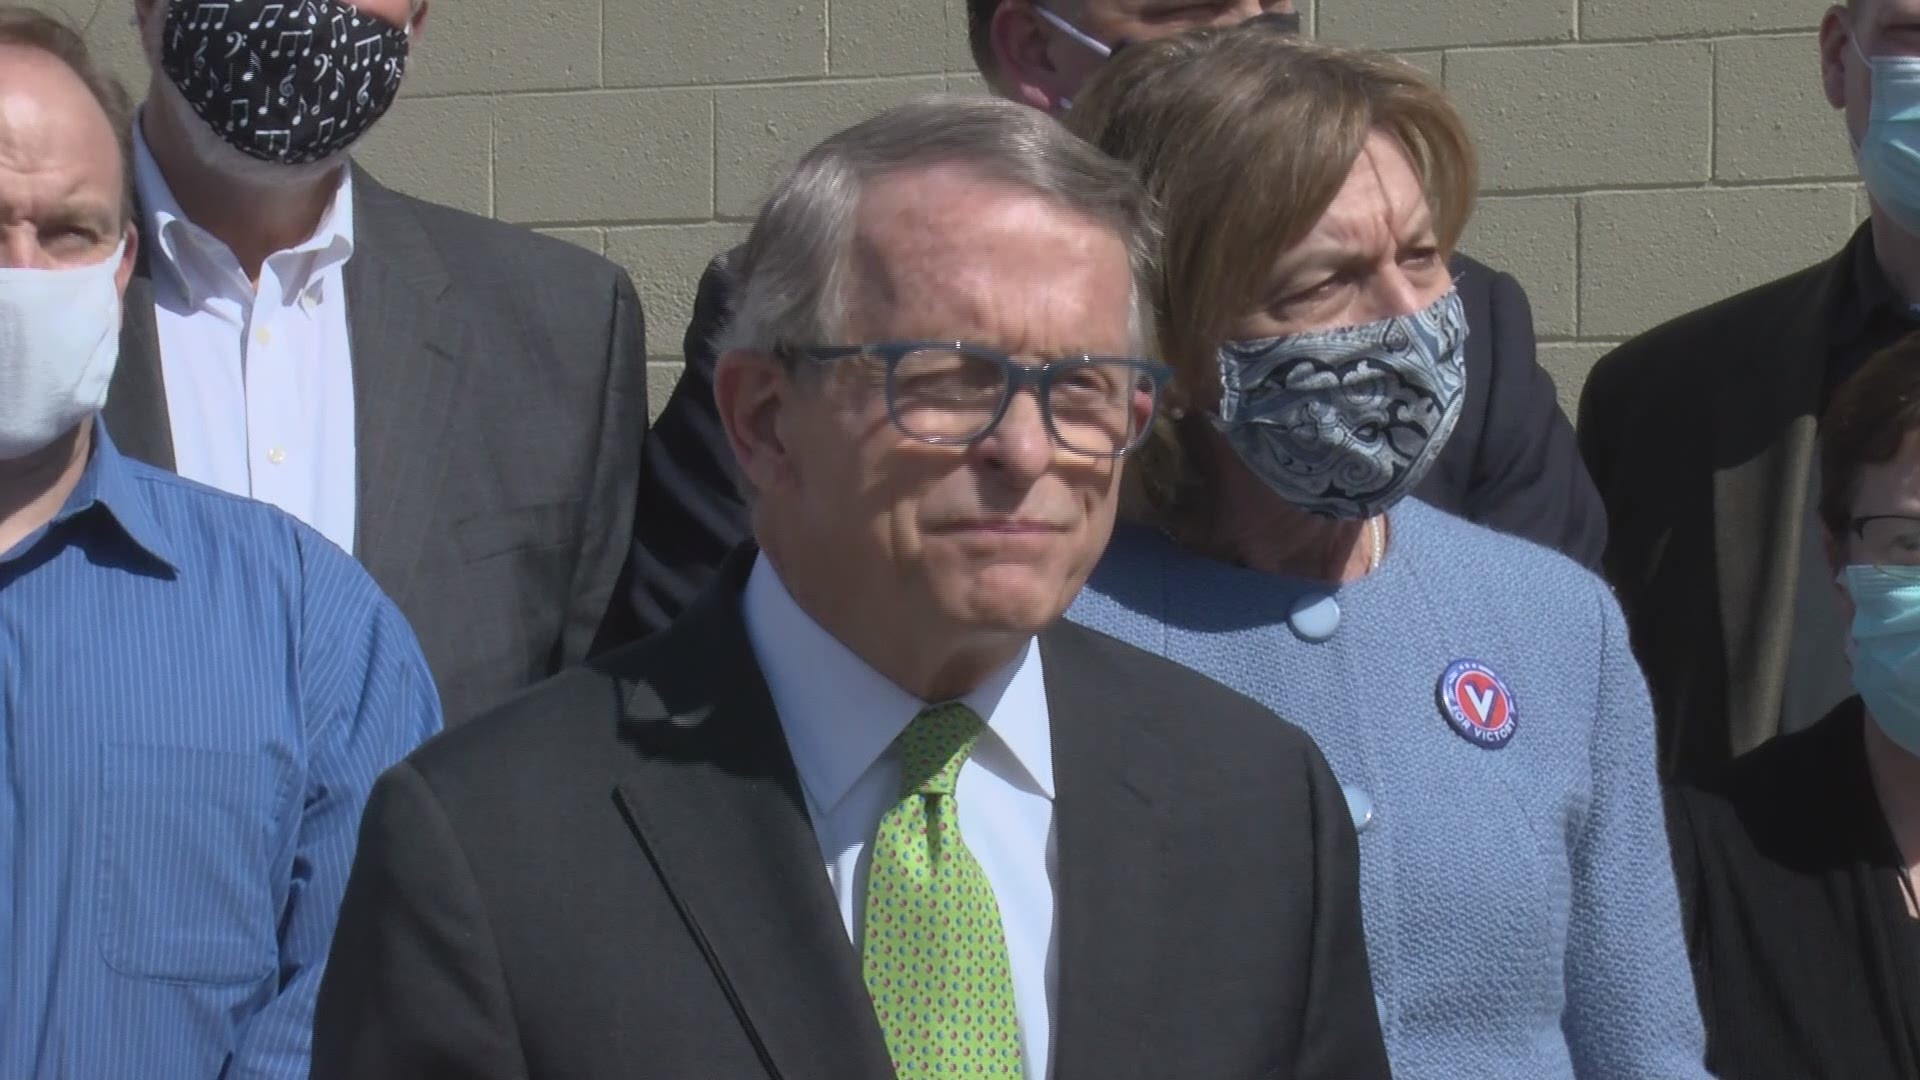 Gov. DeWine and his wife Fran were impressed by the efficiency of the operation at the vaccination clinic.